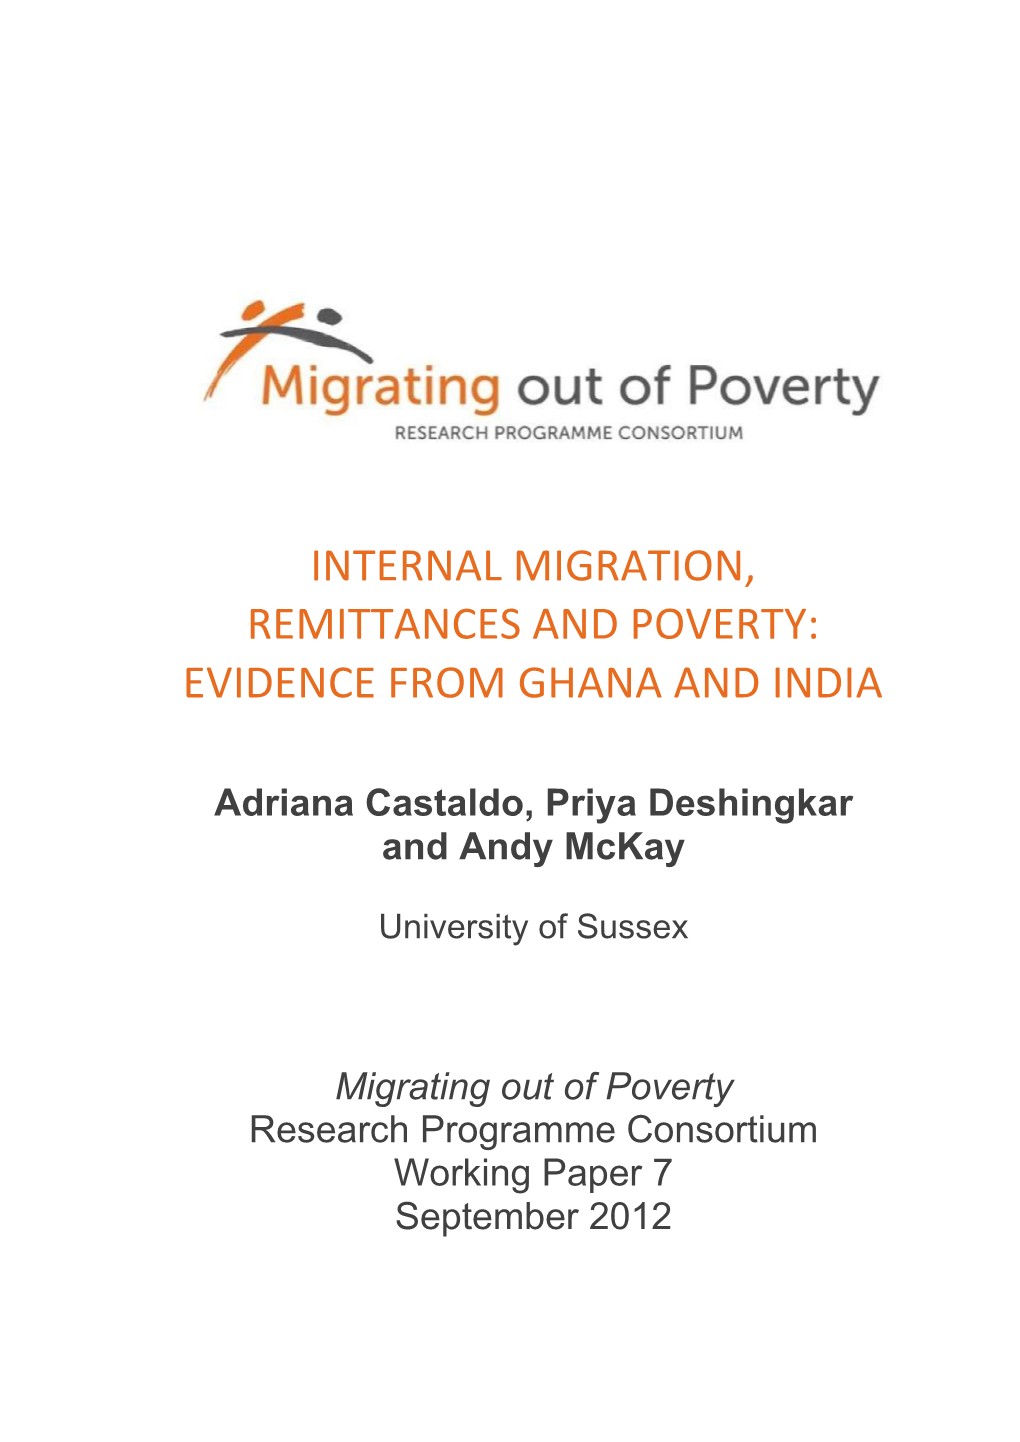 Internal Migration, Remittances and Poverty: Evidence from Ghana and India